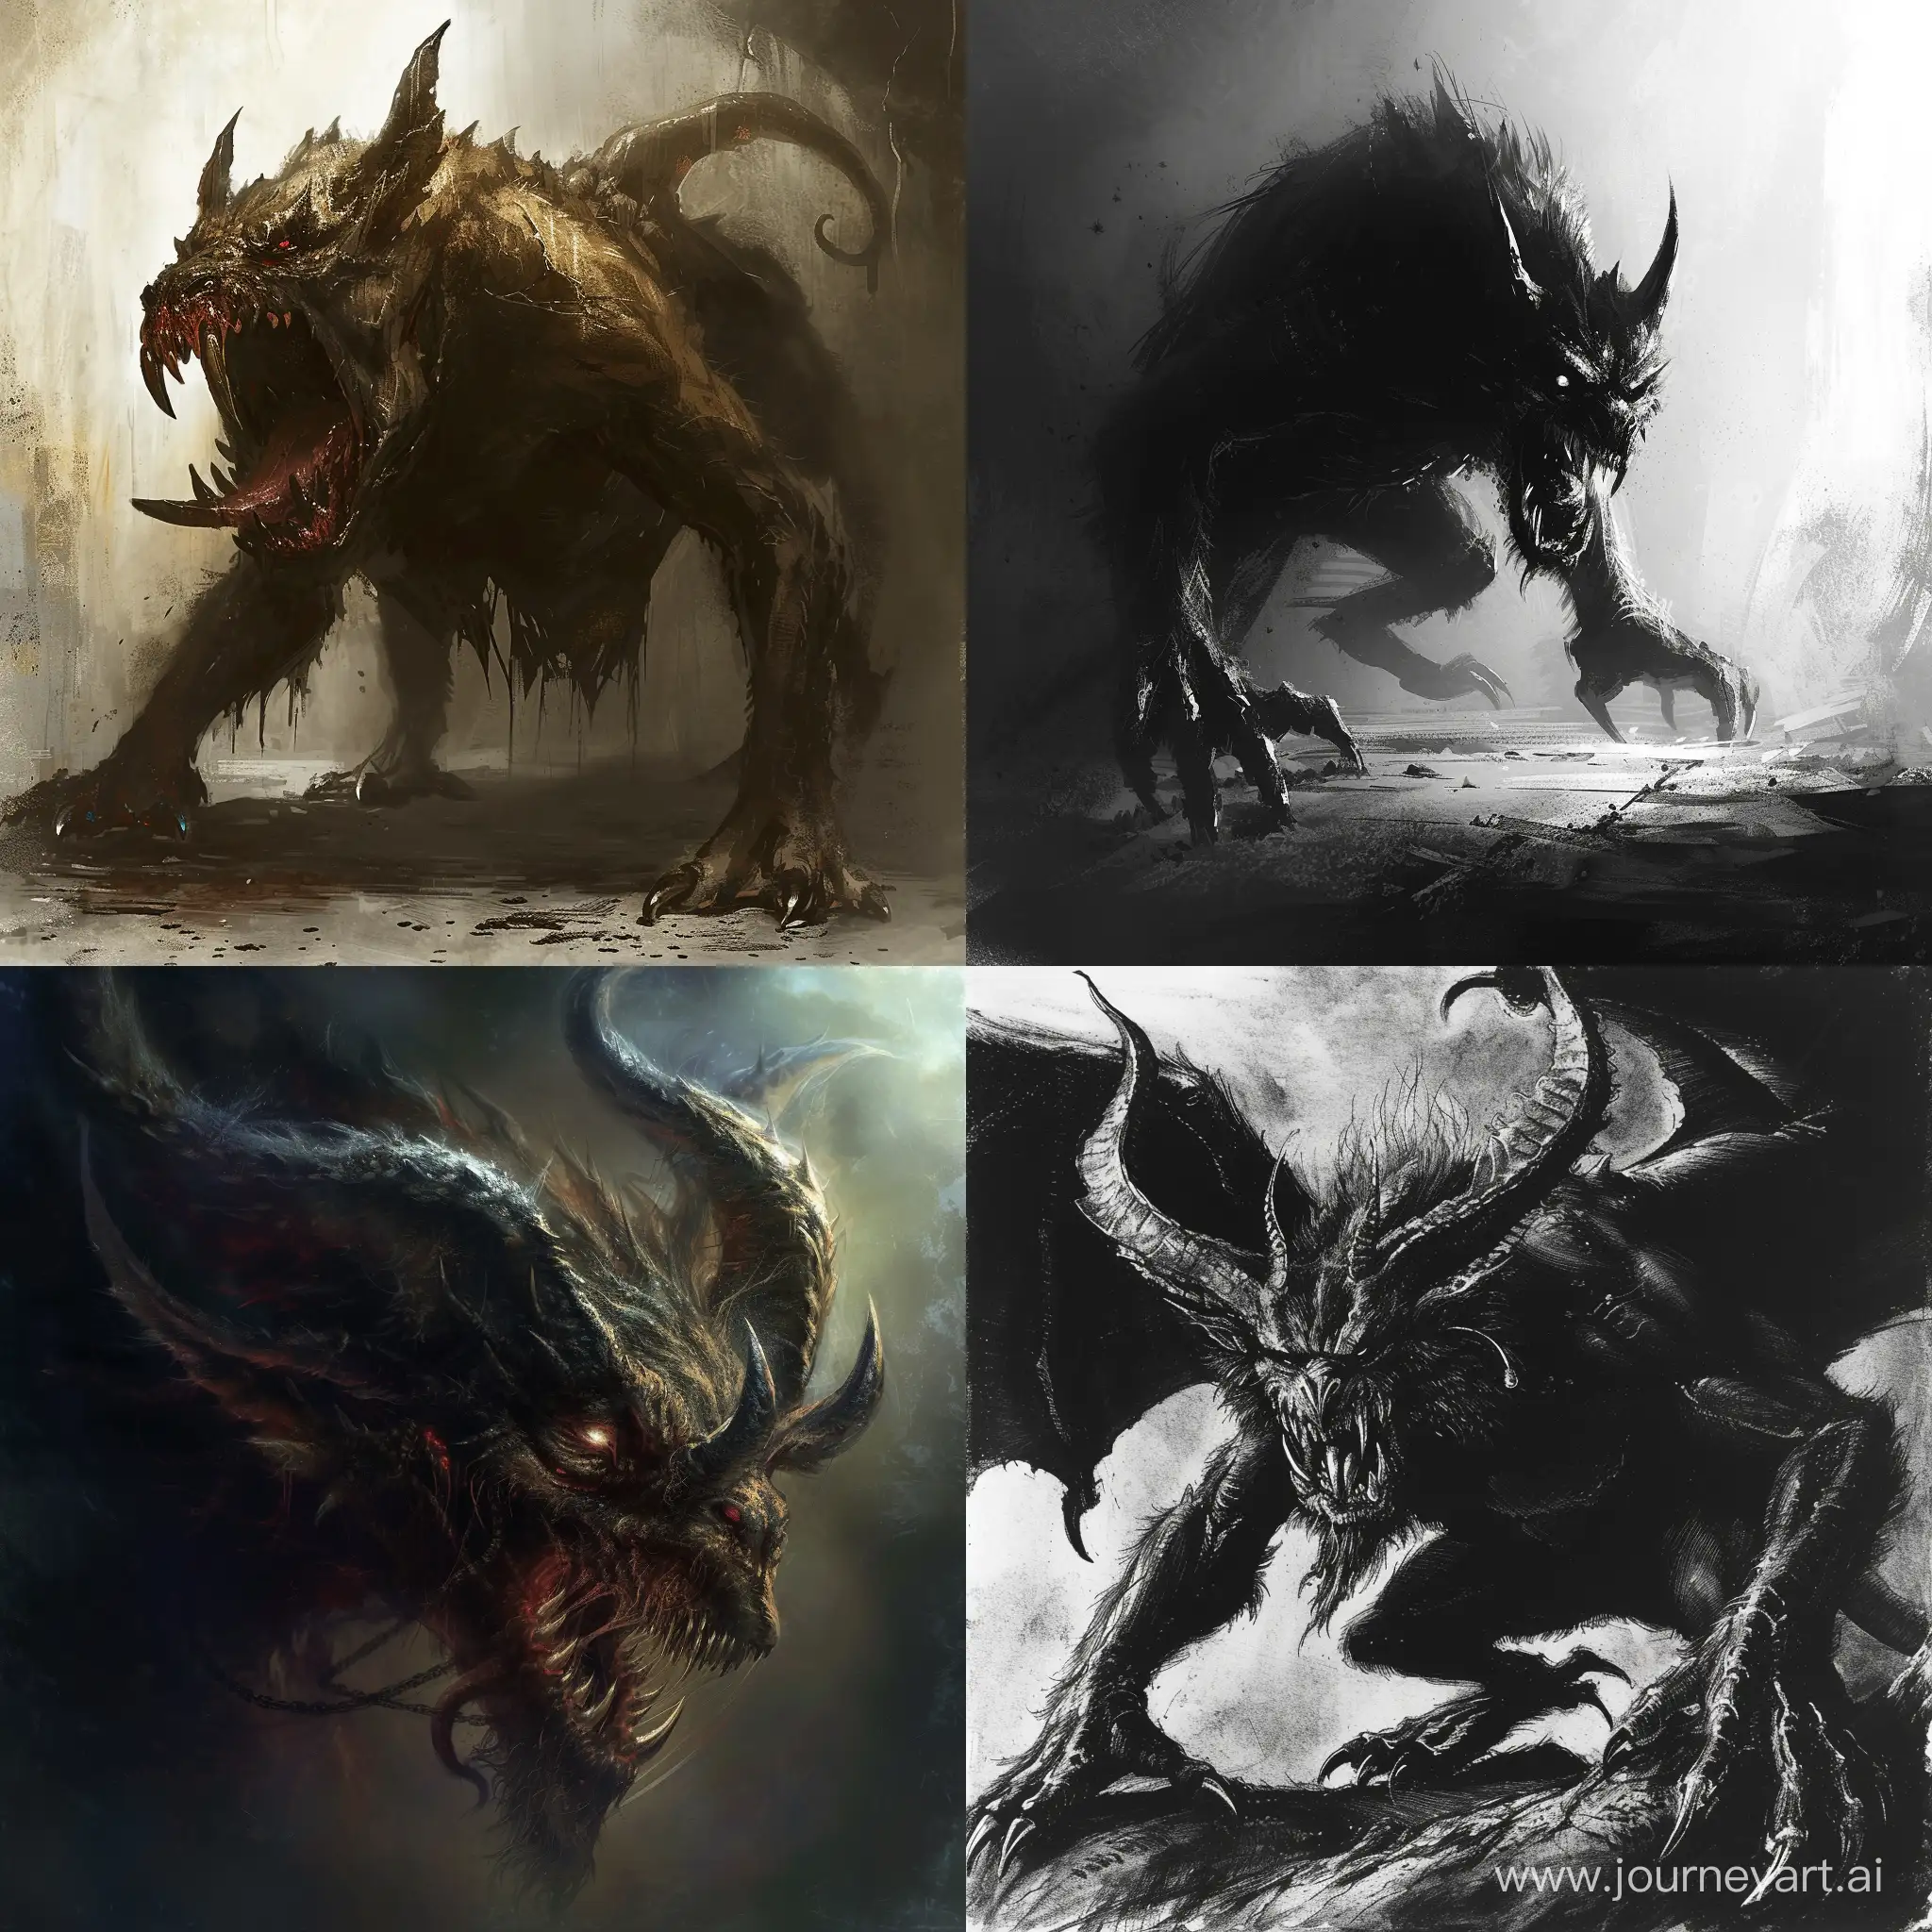 Malevolent-SoulStealing-Beast-in-Vibrant-Artistic-Display